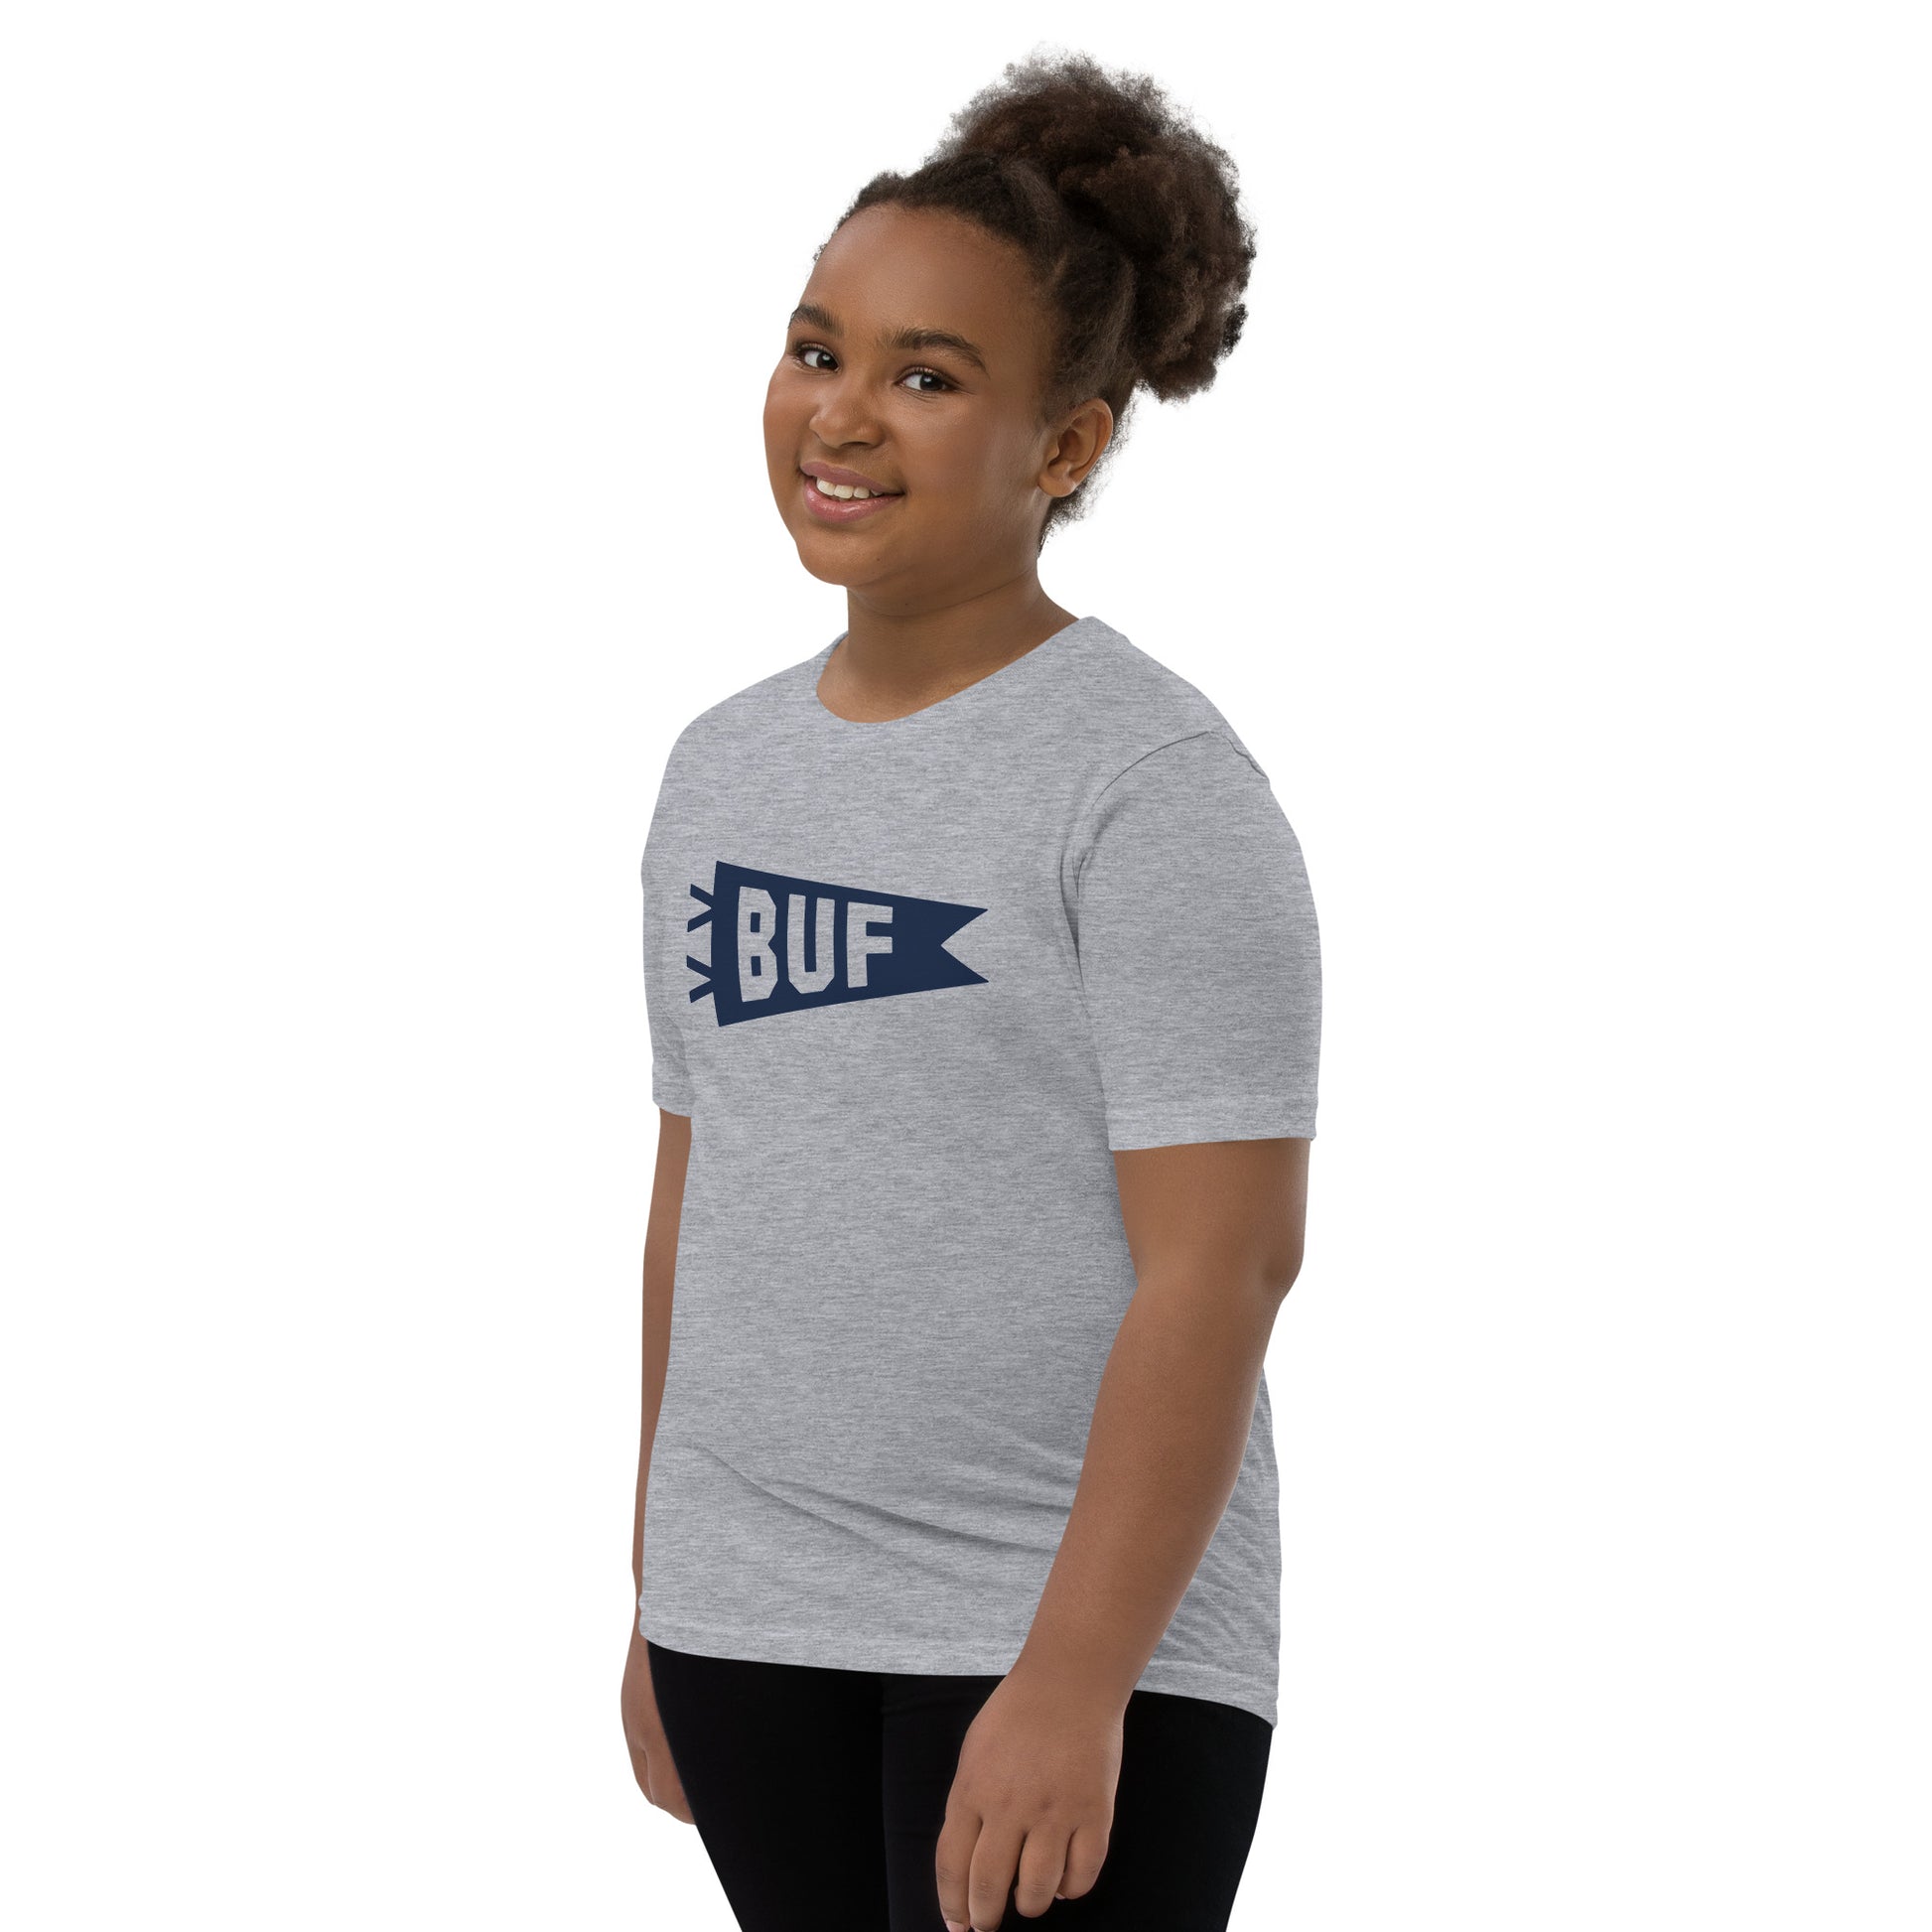 Kid's Airport Code Tee - Navy Blue Graphic • BUF Buffalo • YHM Designs - Image 04